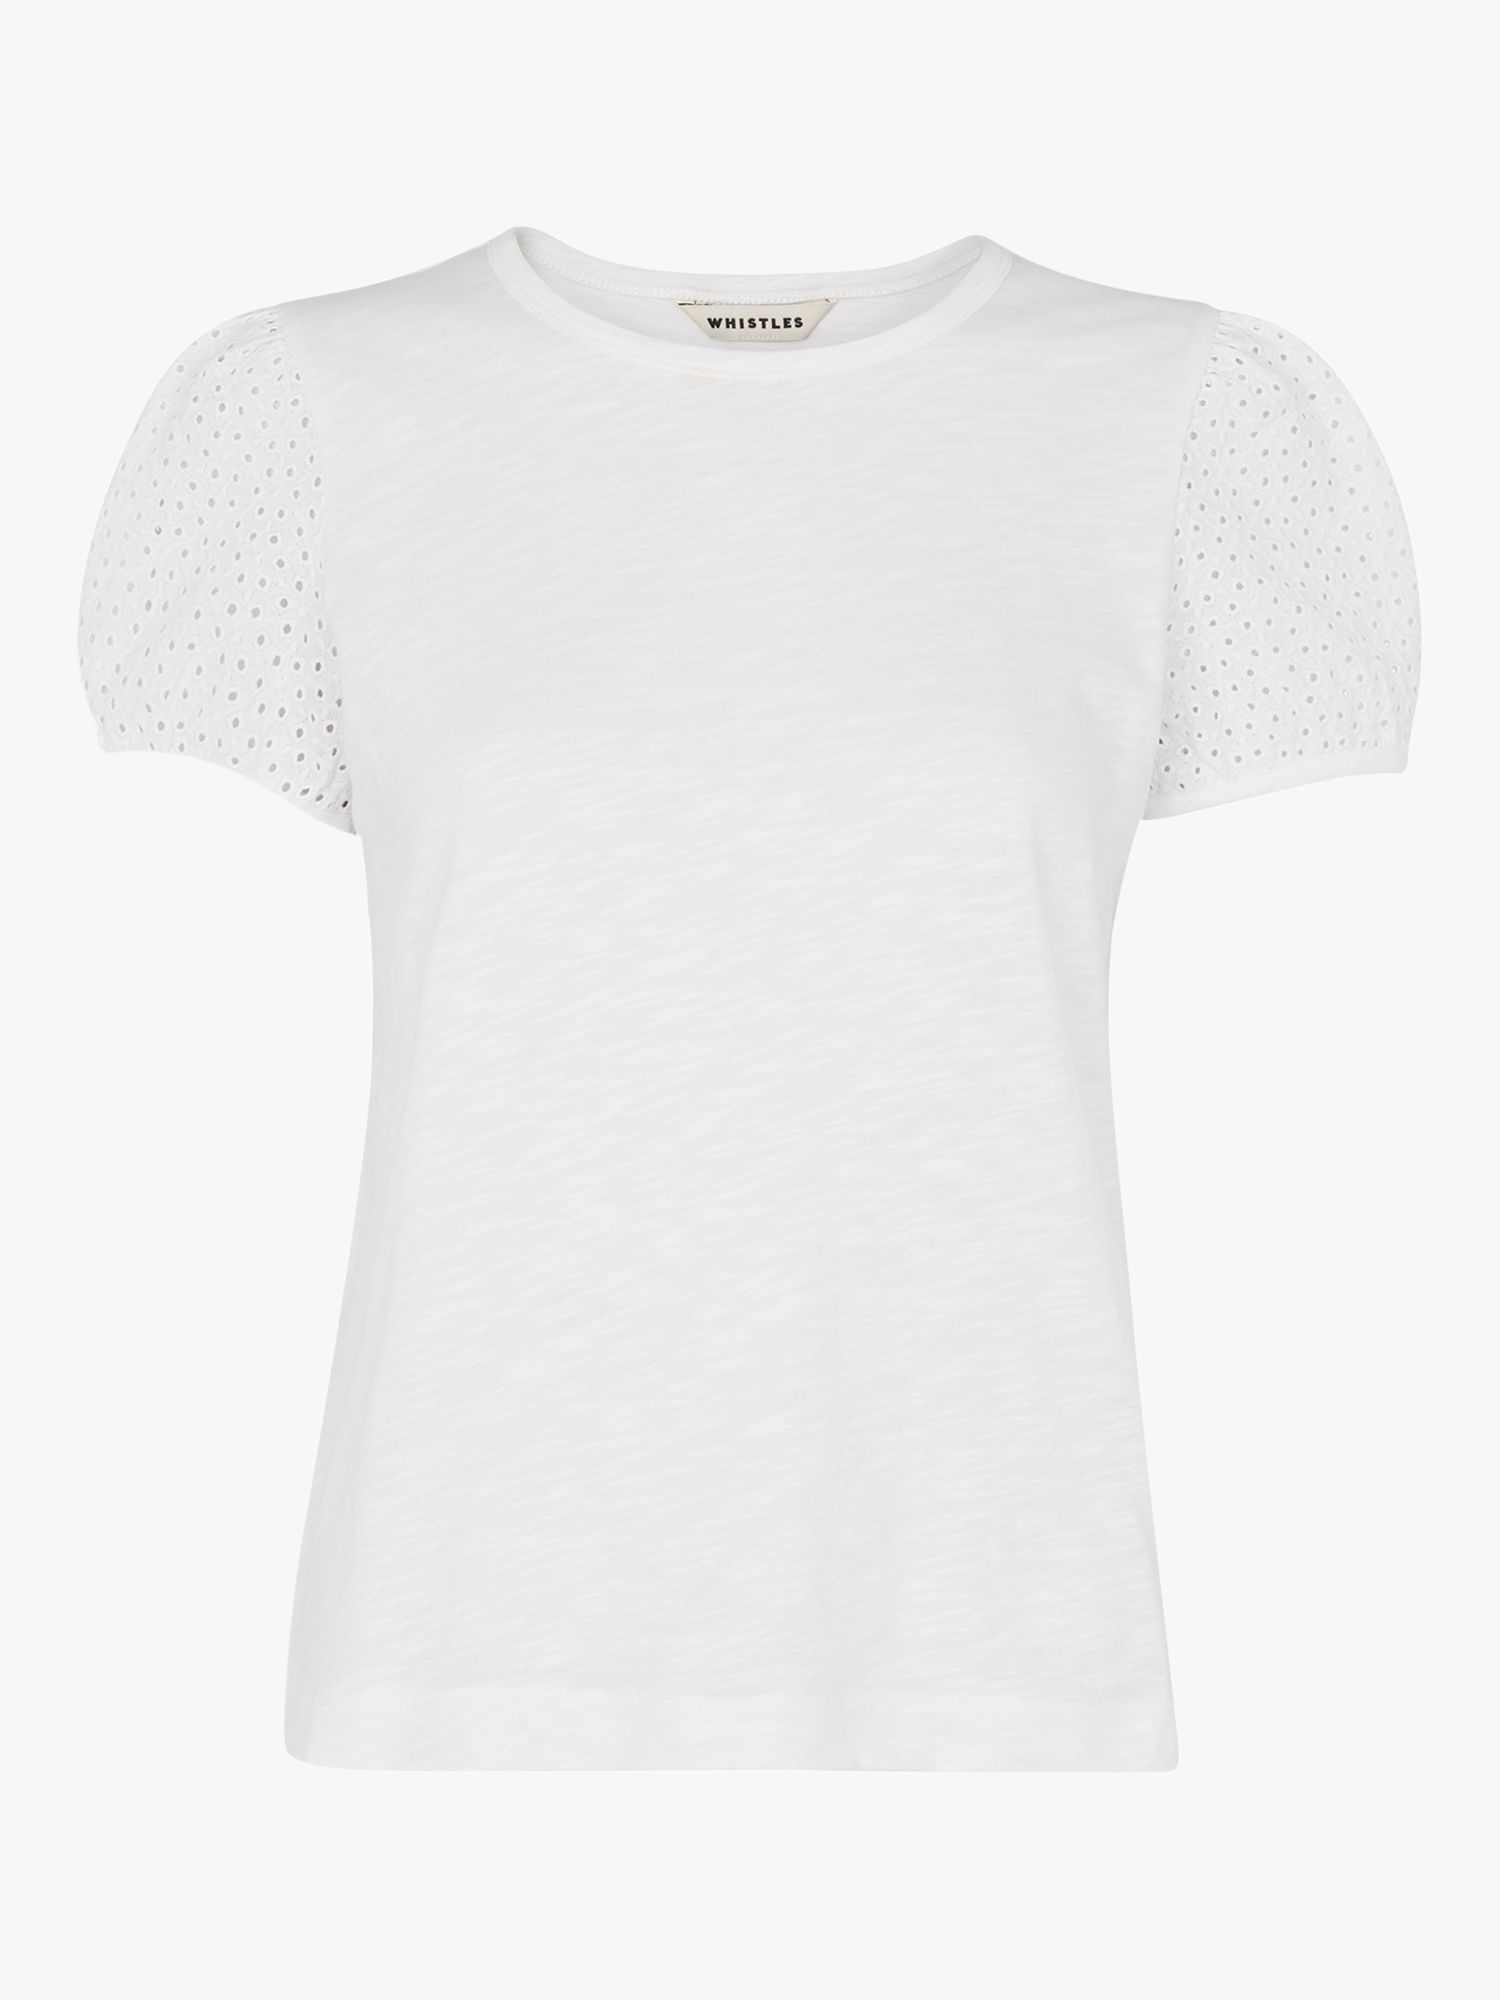 Buy Whistles Broderie Puff Sleeve T-Shirt Online at johnlewis.com